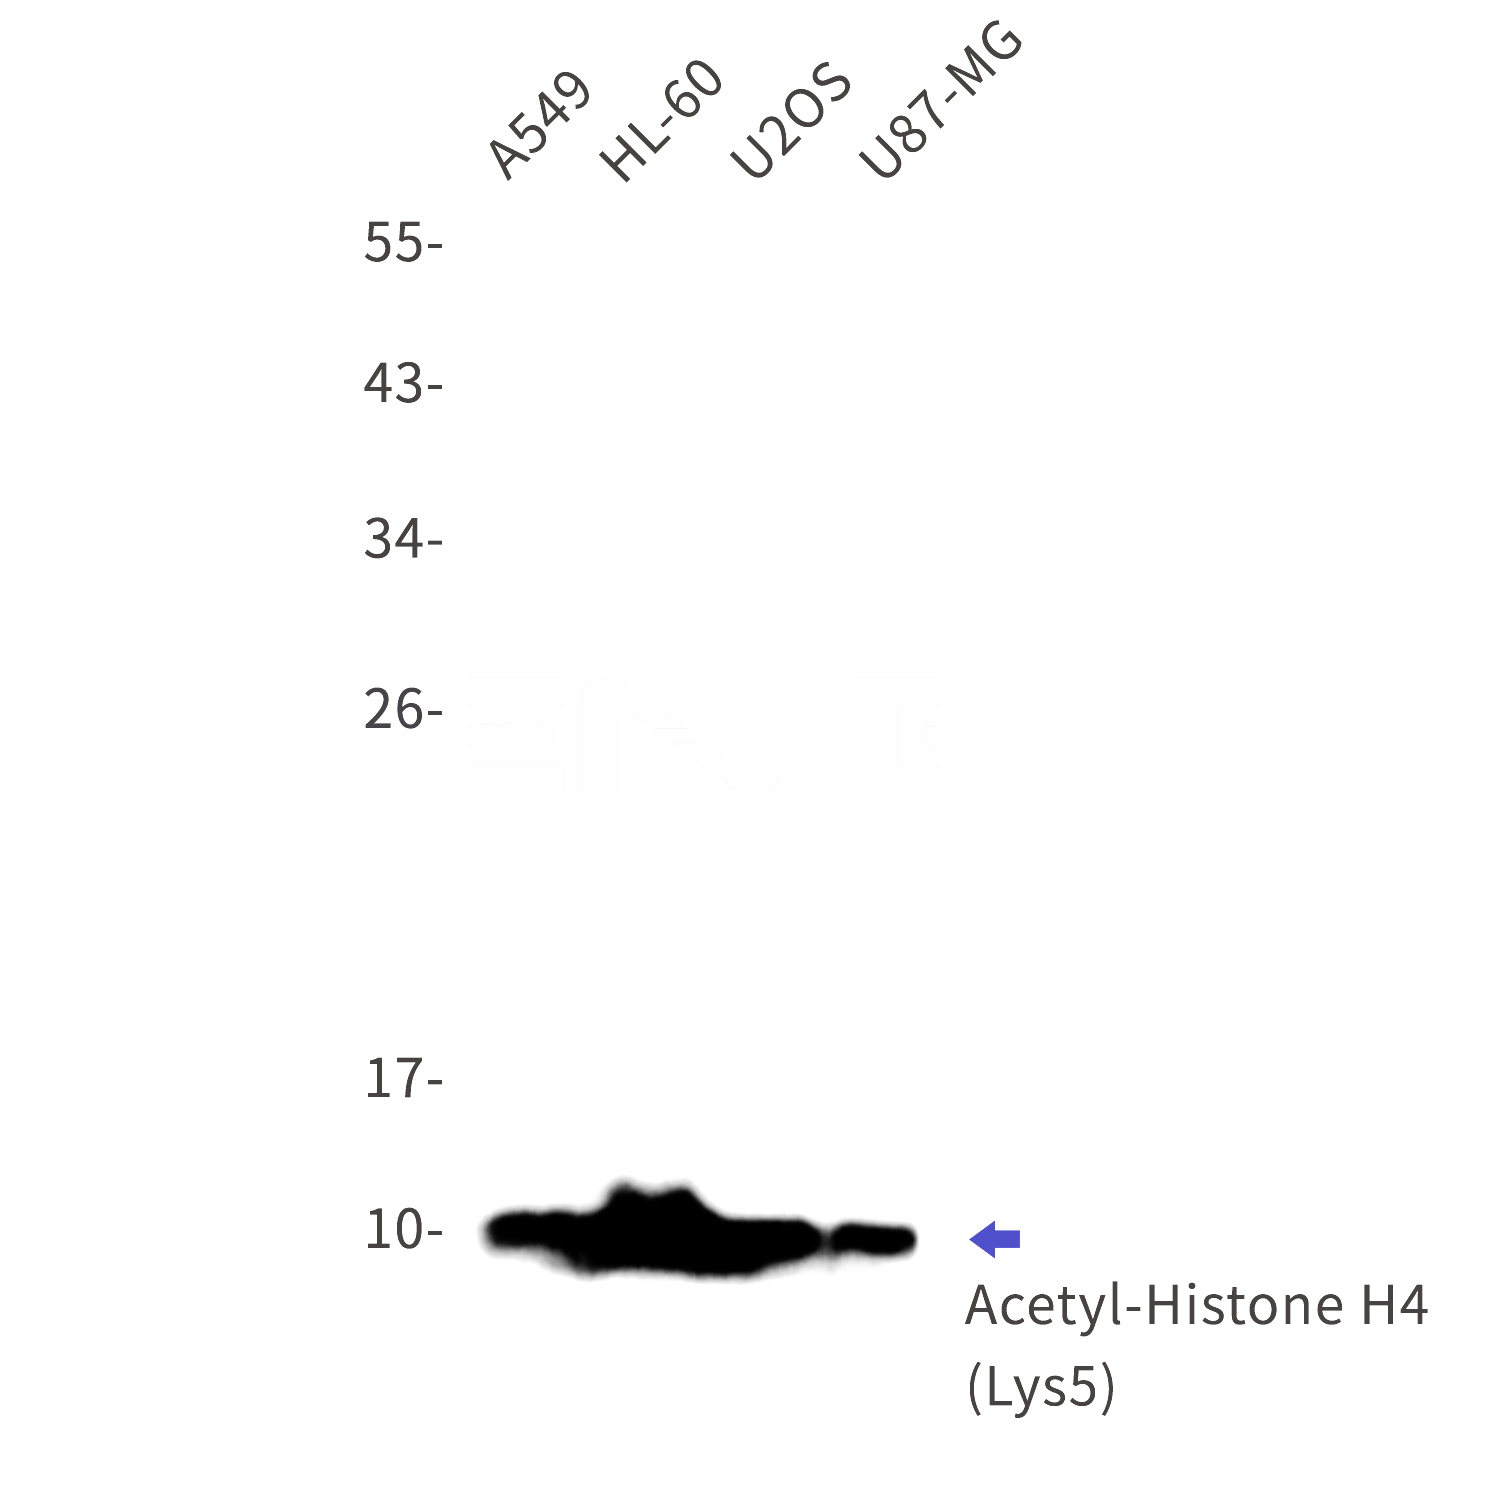 Western blot detection of Acetyl-Histone H4 (Lys5) in A549,HL-60,U2OS,U87-MG cell lysates using Acetyl-Histone H4 (Lys5) Rabbit mAb(1:1000 diluted).Observed band size:11kDa.